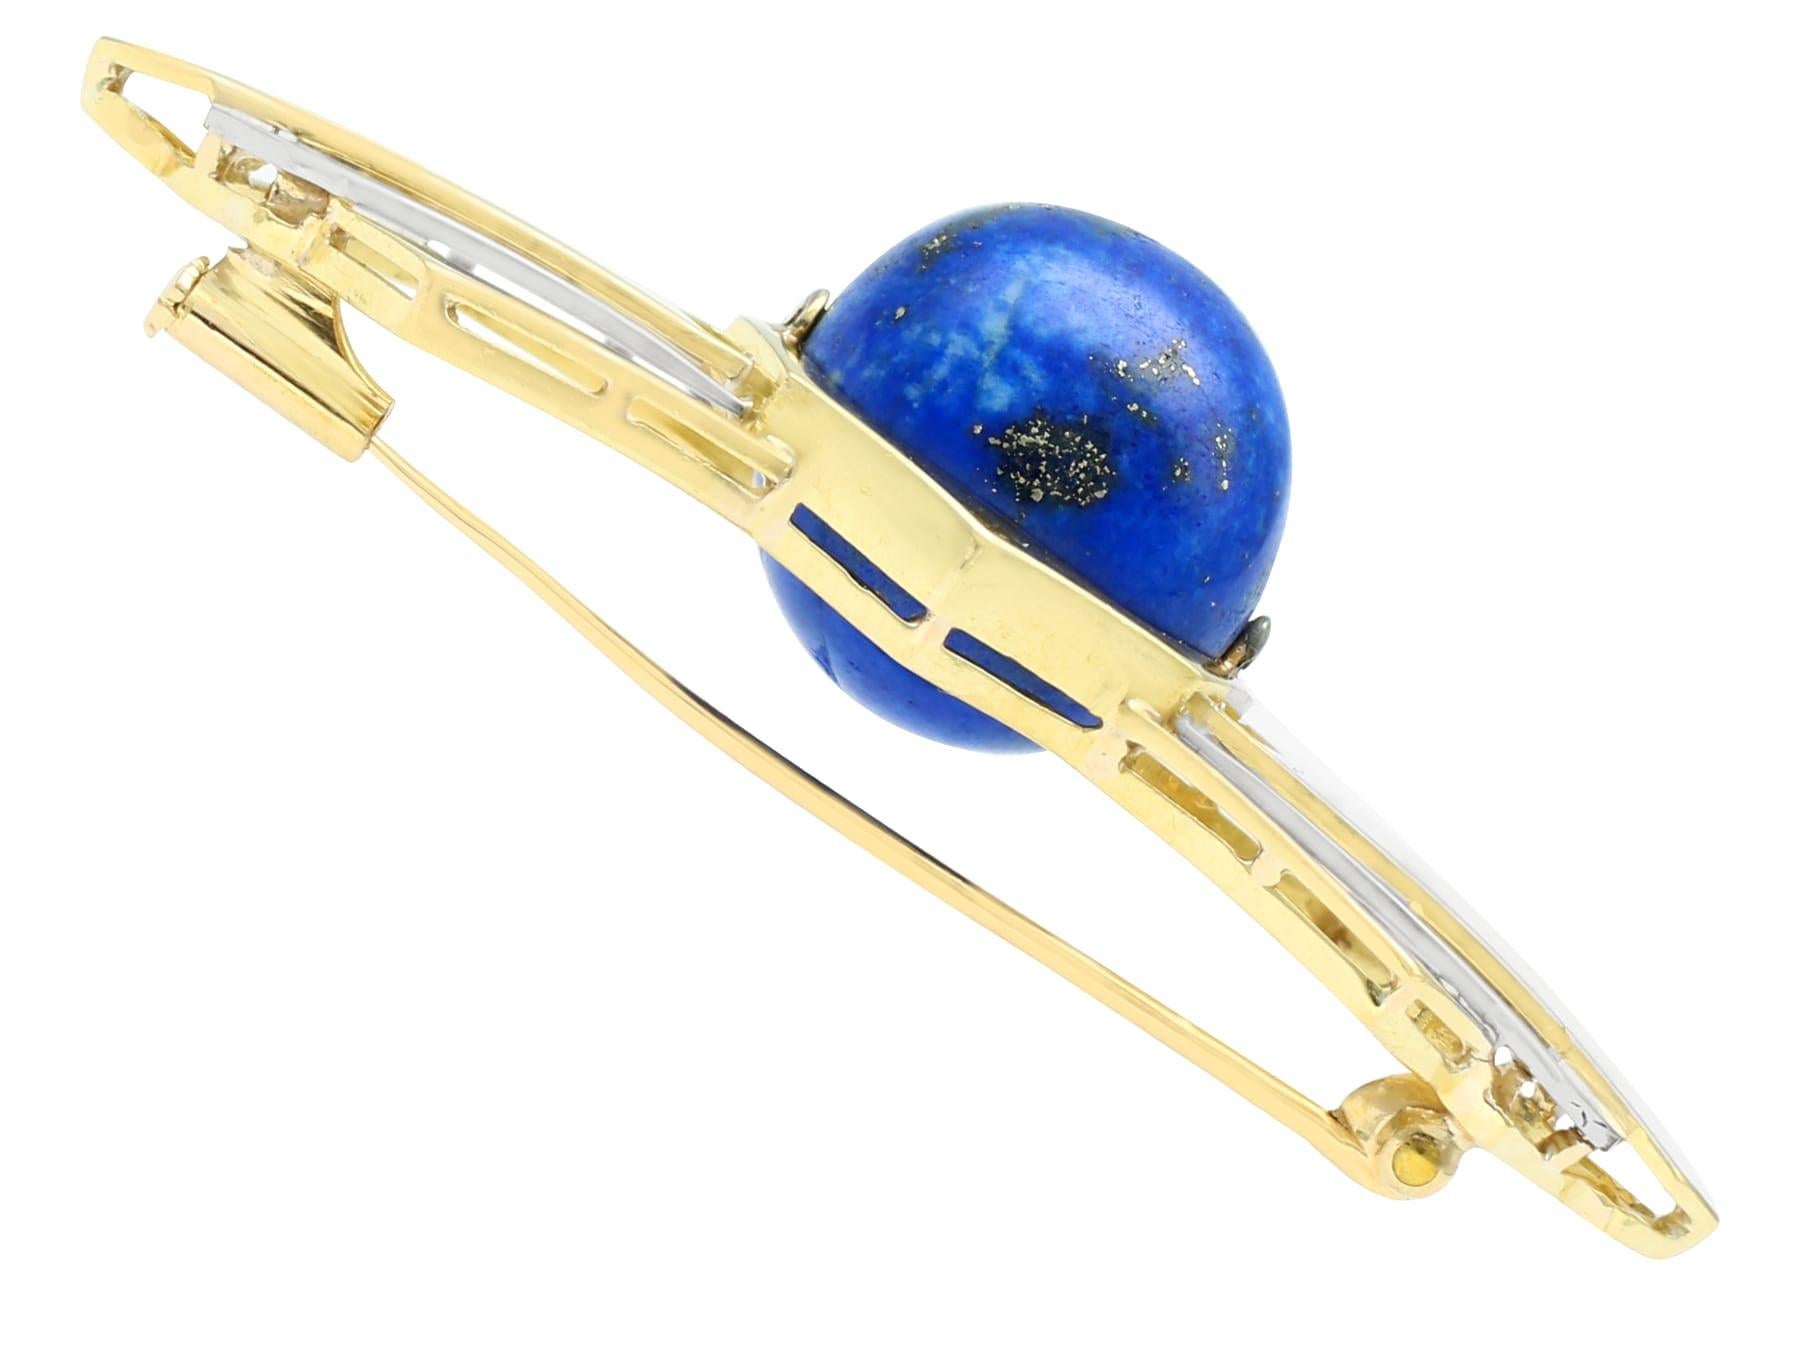 14.95 Carat Lapis Lazuli and Yellow Gold Bow Brooch In Excellent Condition For Sale In Jesmond, Newcastle Upon Tyne